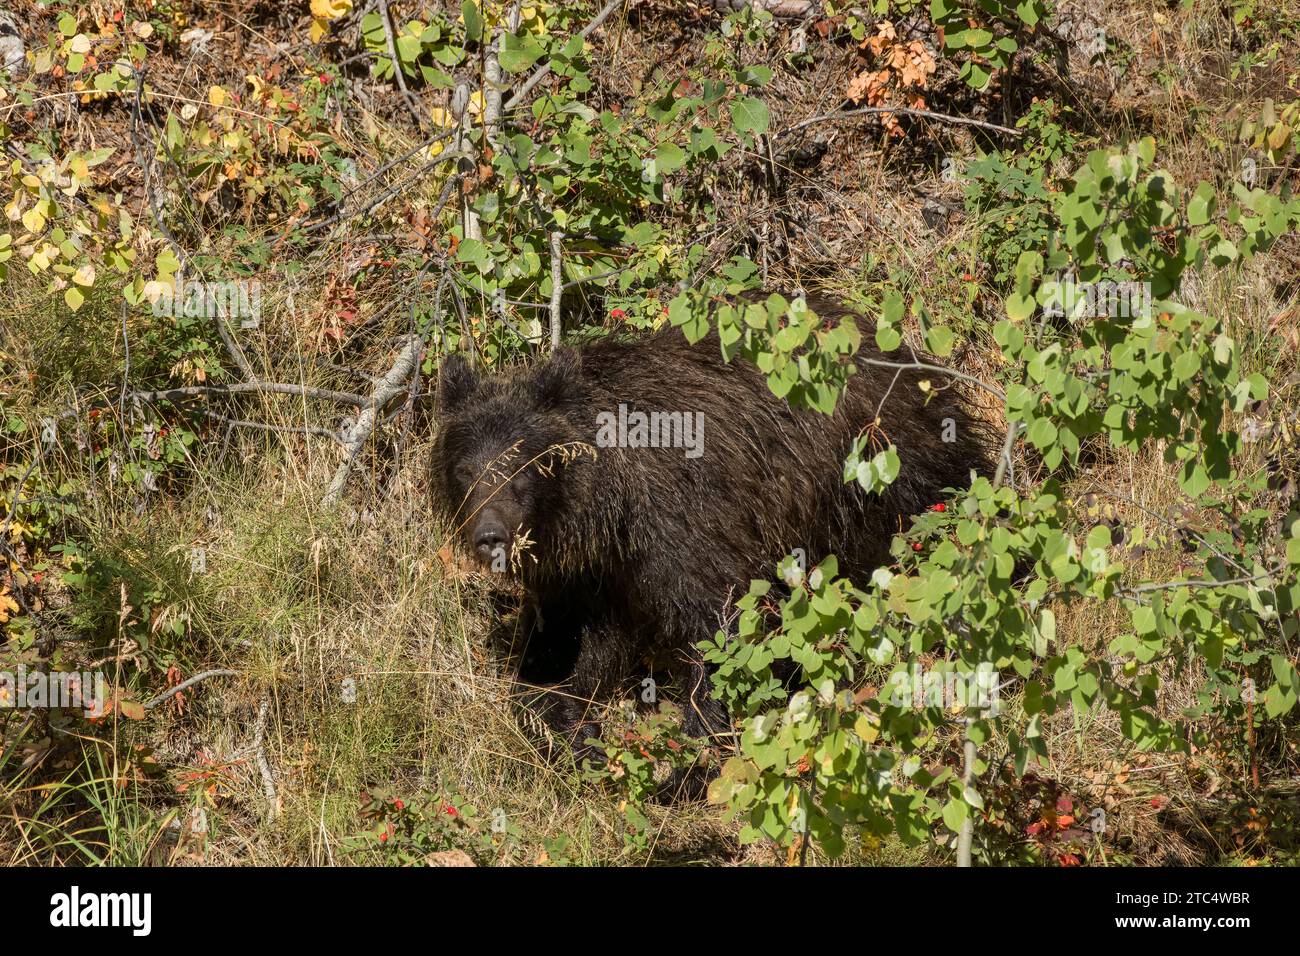 Grizzly bear cub 'hiding' behind some grass stalks, Chilko River, BC Stock Photo